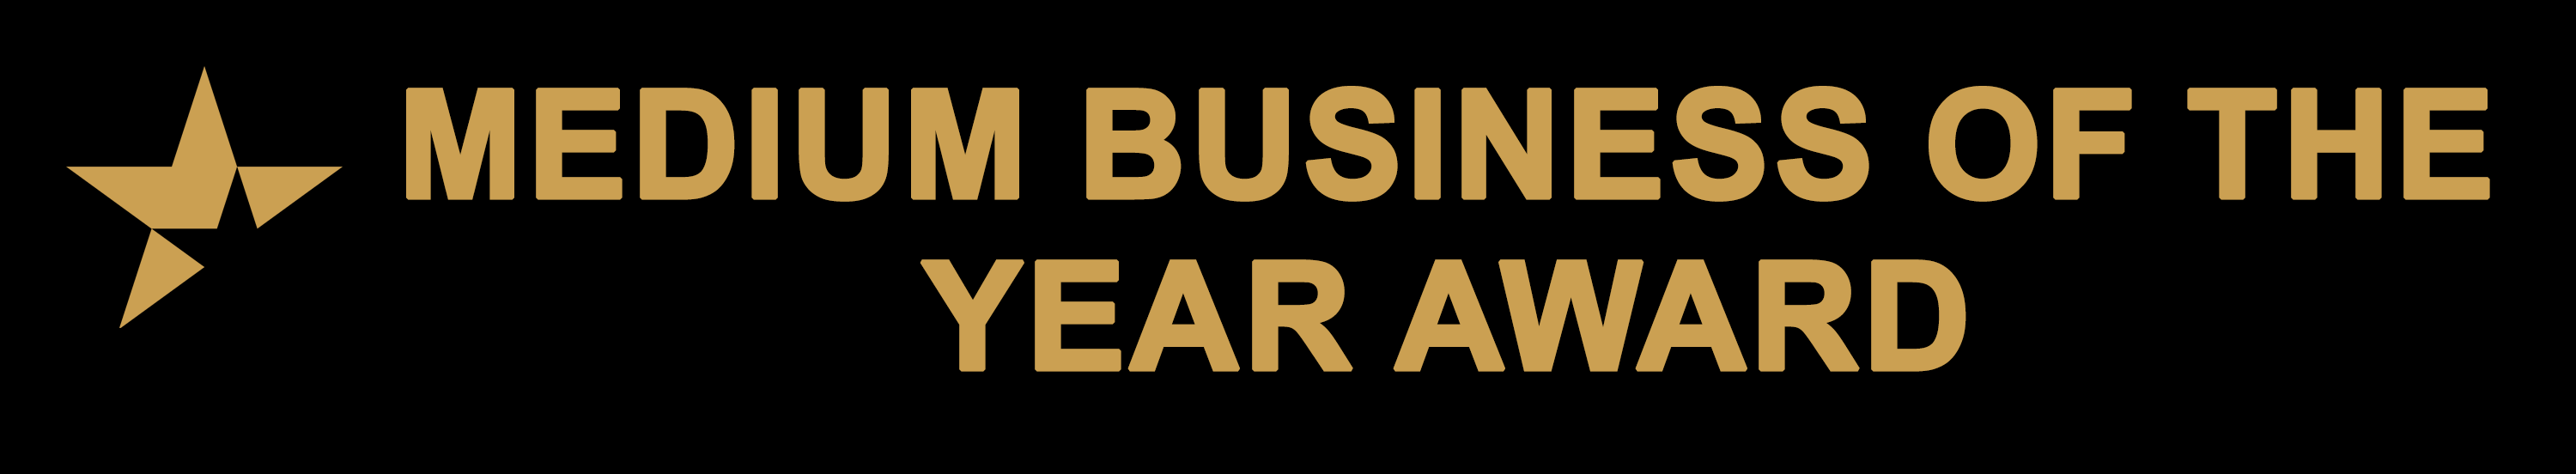 medium business of the year award name only